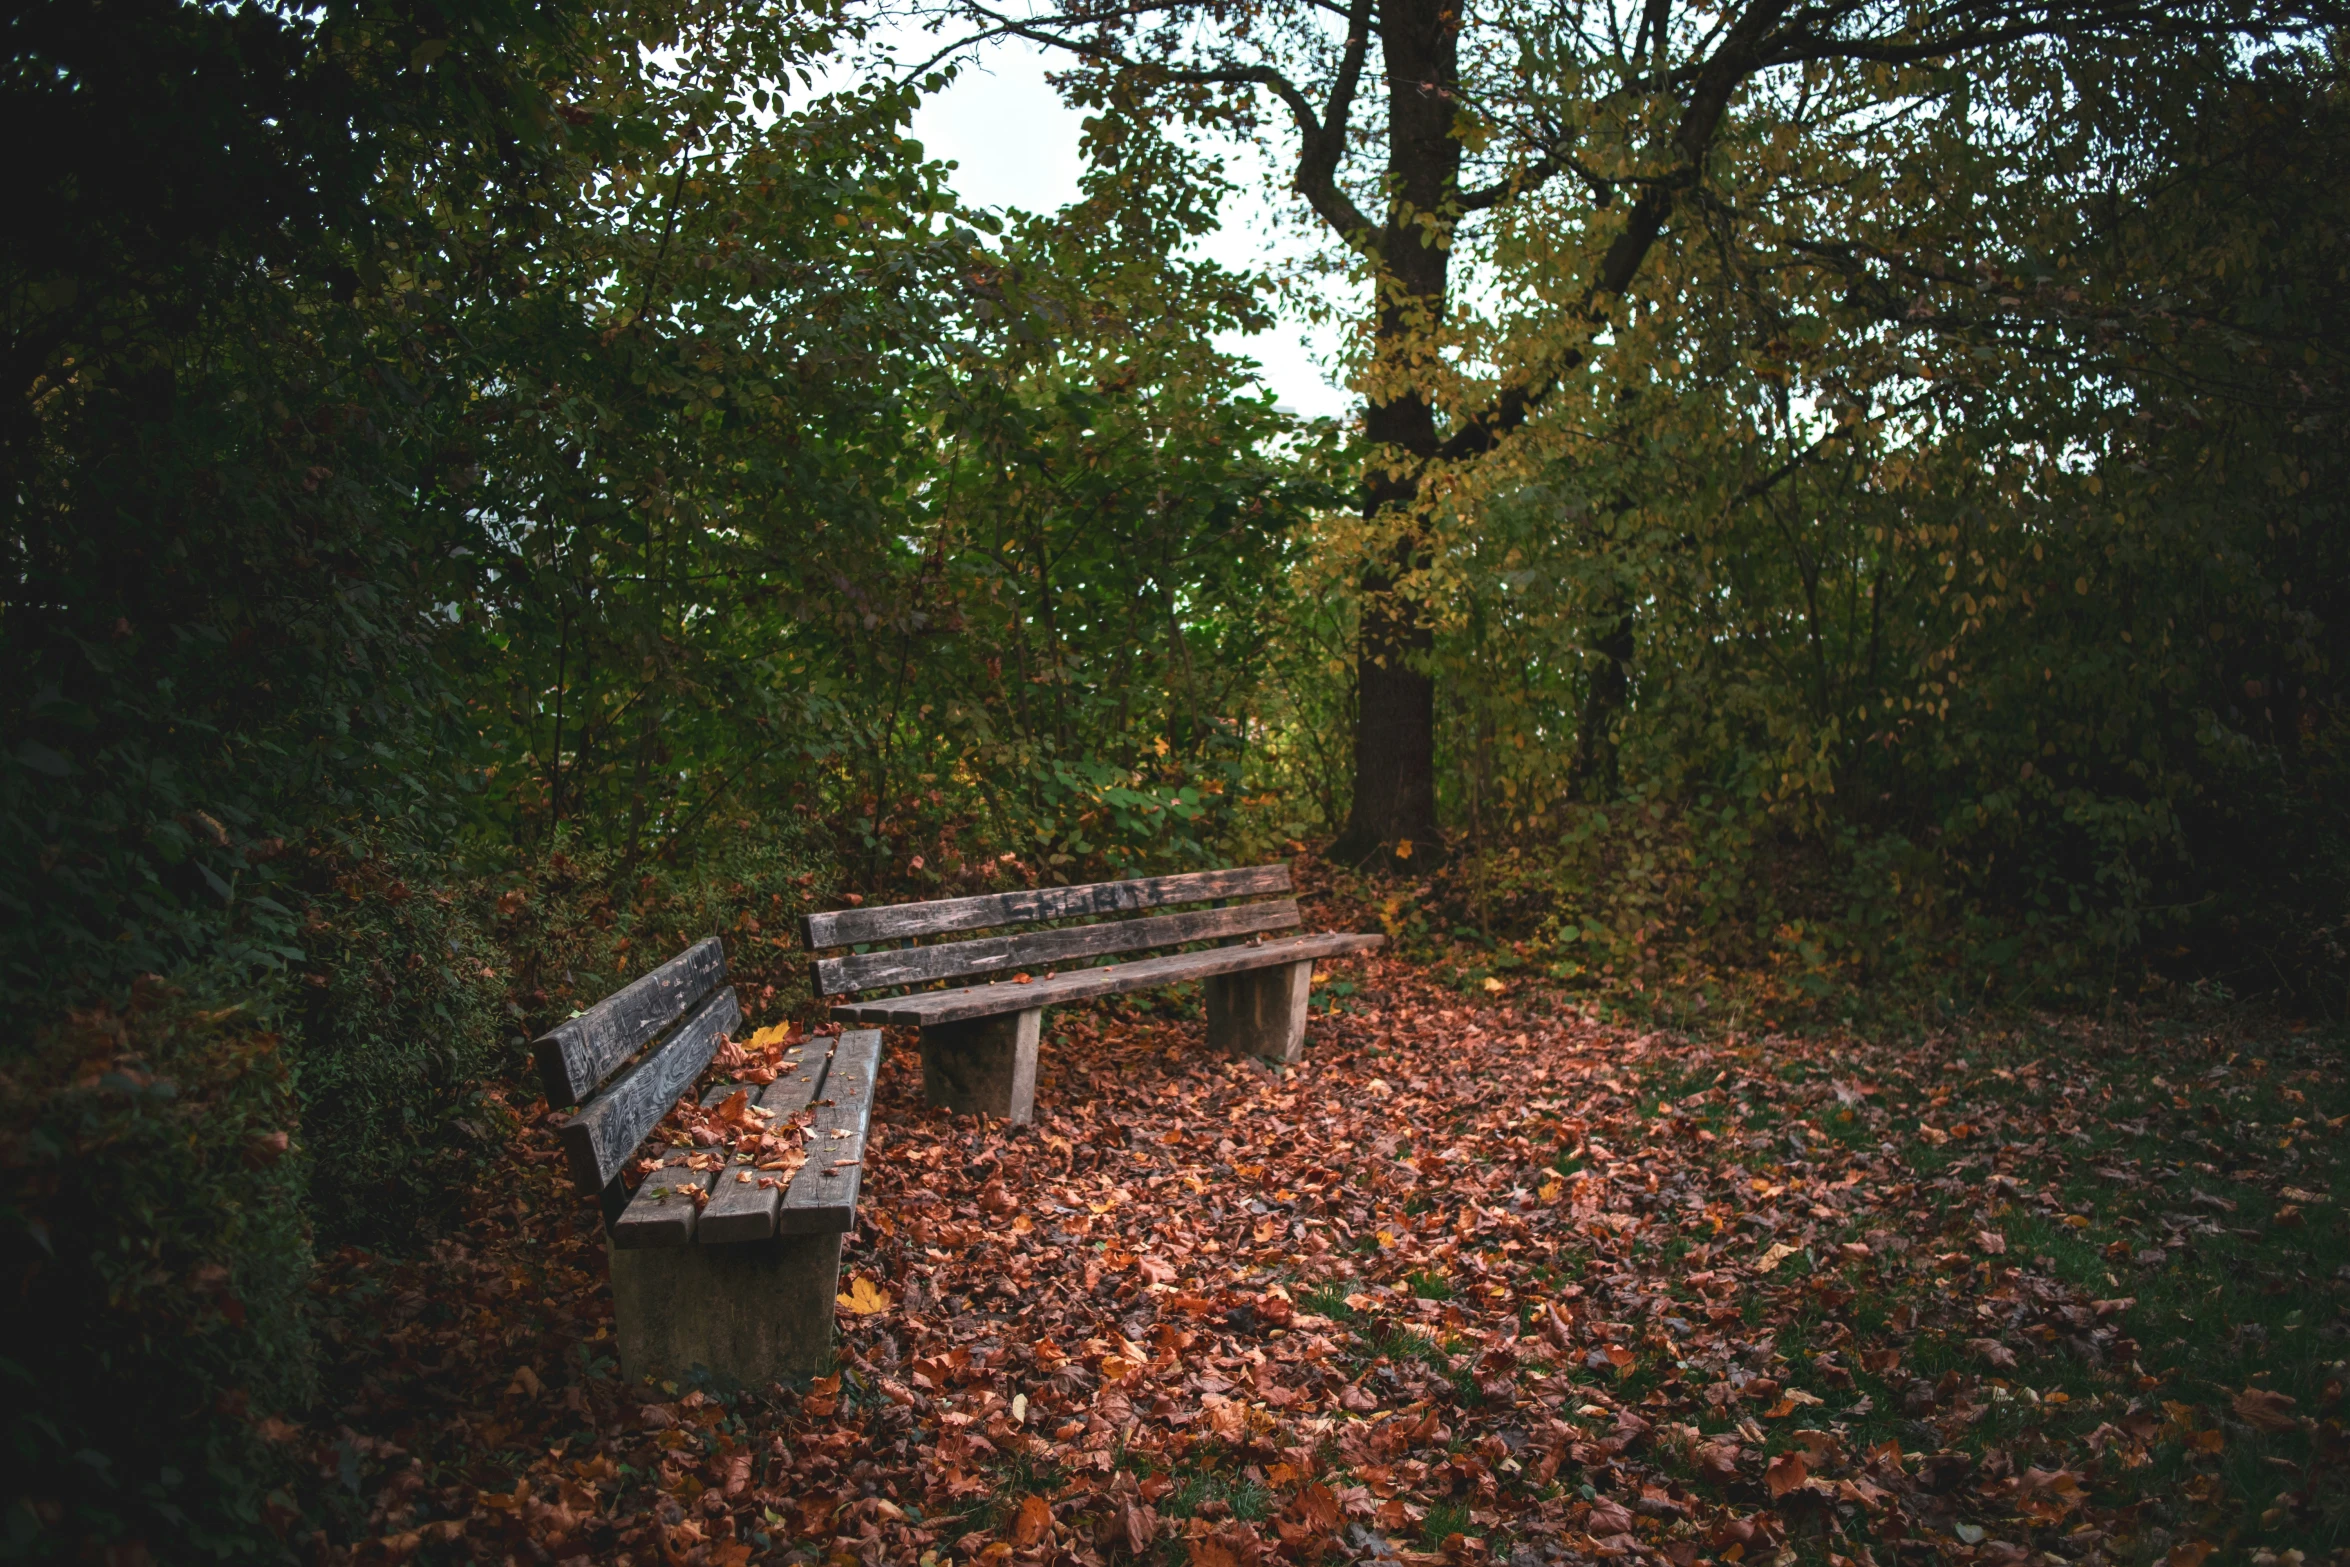 a bench with leaves on the ground near some trees